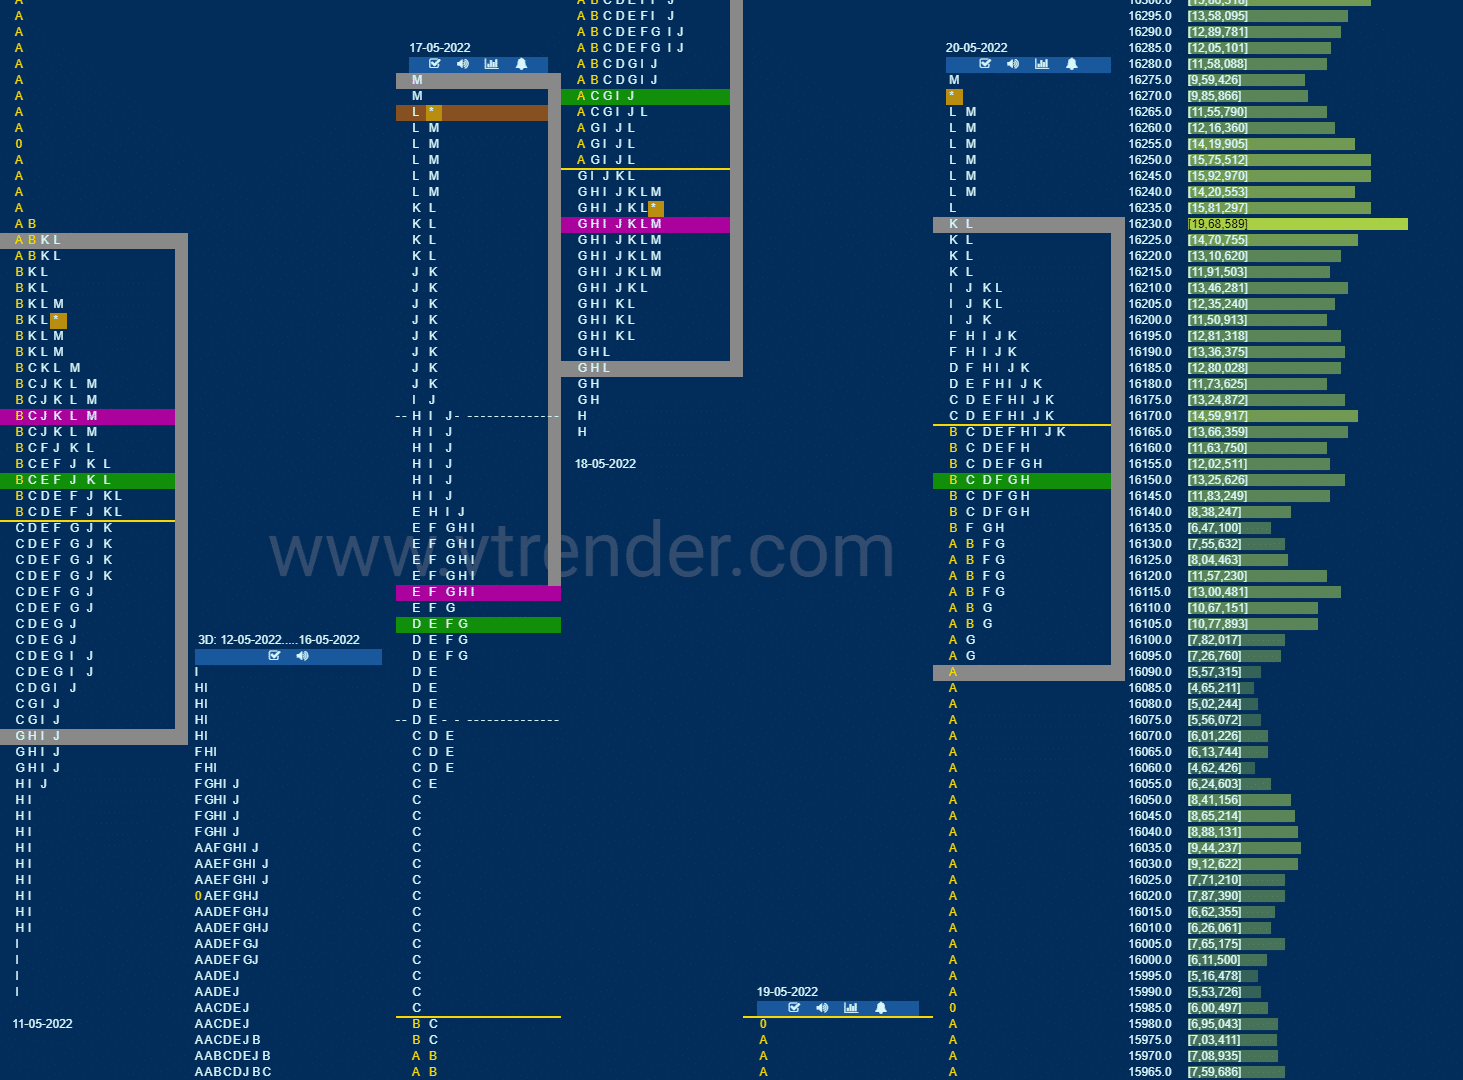 Nf 14 Market Profile Analysis Dated 20Th May 2022 Banknifty Futures, Charts, Day Trading, Intraday Trading, Intraday Trading Strategies, Market Profile, Market Profile Trading Strategies, Nifty Futures, Order Flow Analysis, Support And Resistance, Technical Analysis, Trading Strategies, Volume Profile Trading